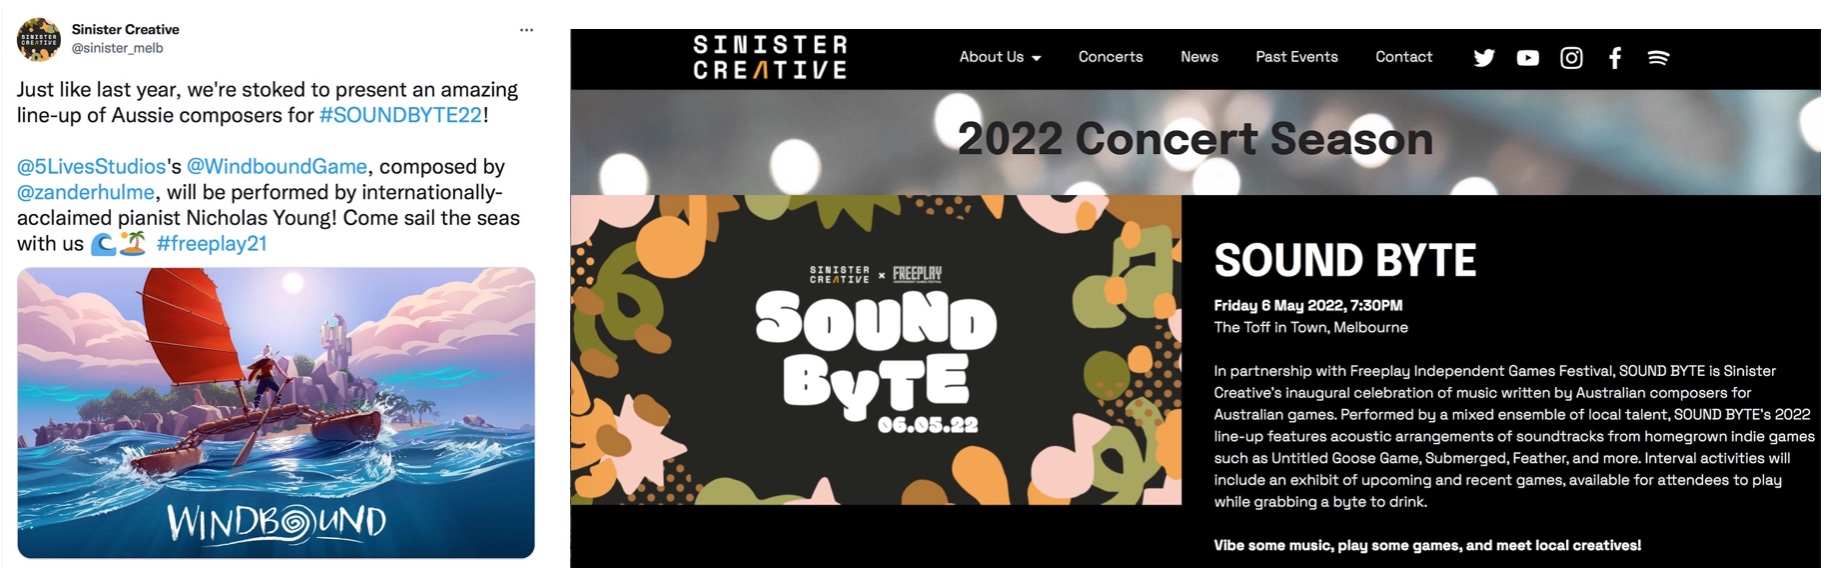 Sinister Creative: SoundByte – Friday 6th May @ Toff In Town …